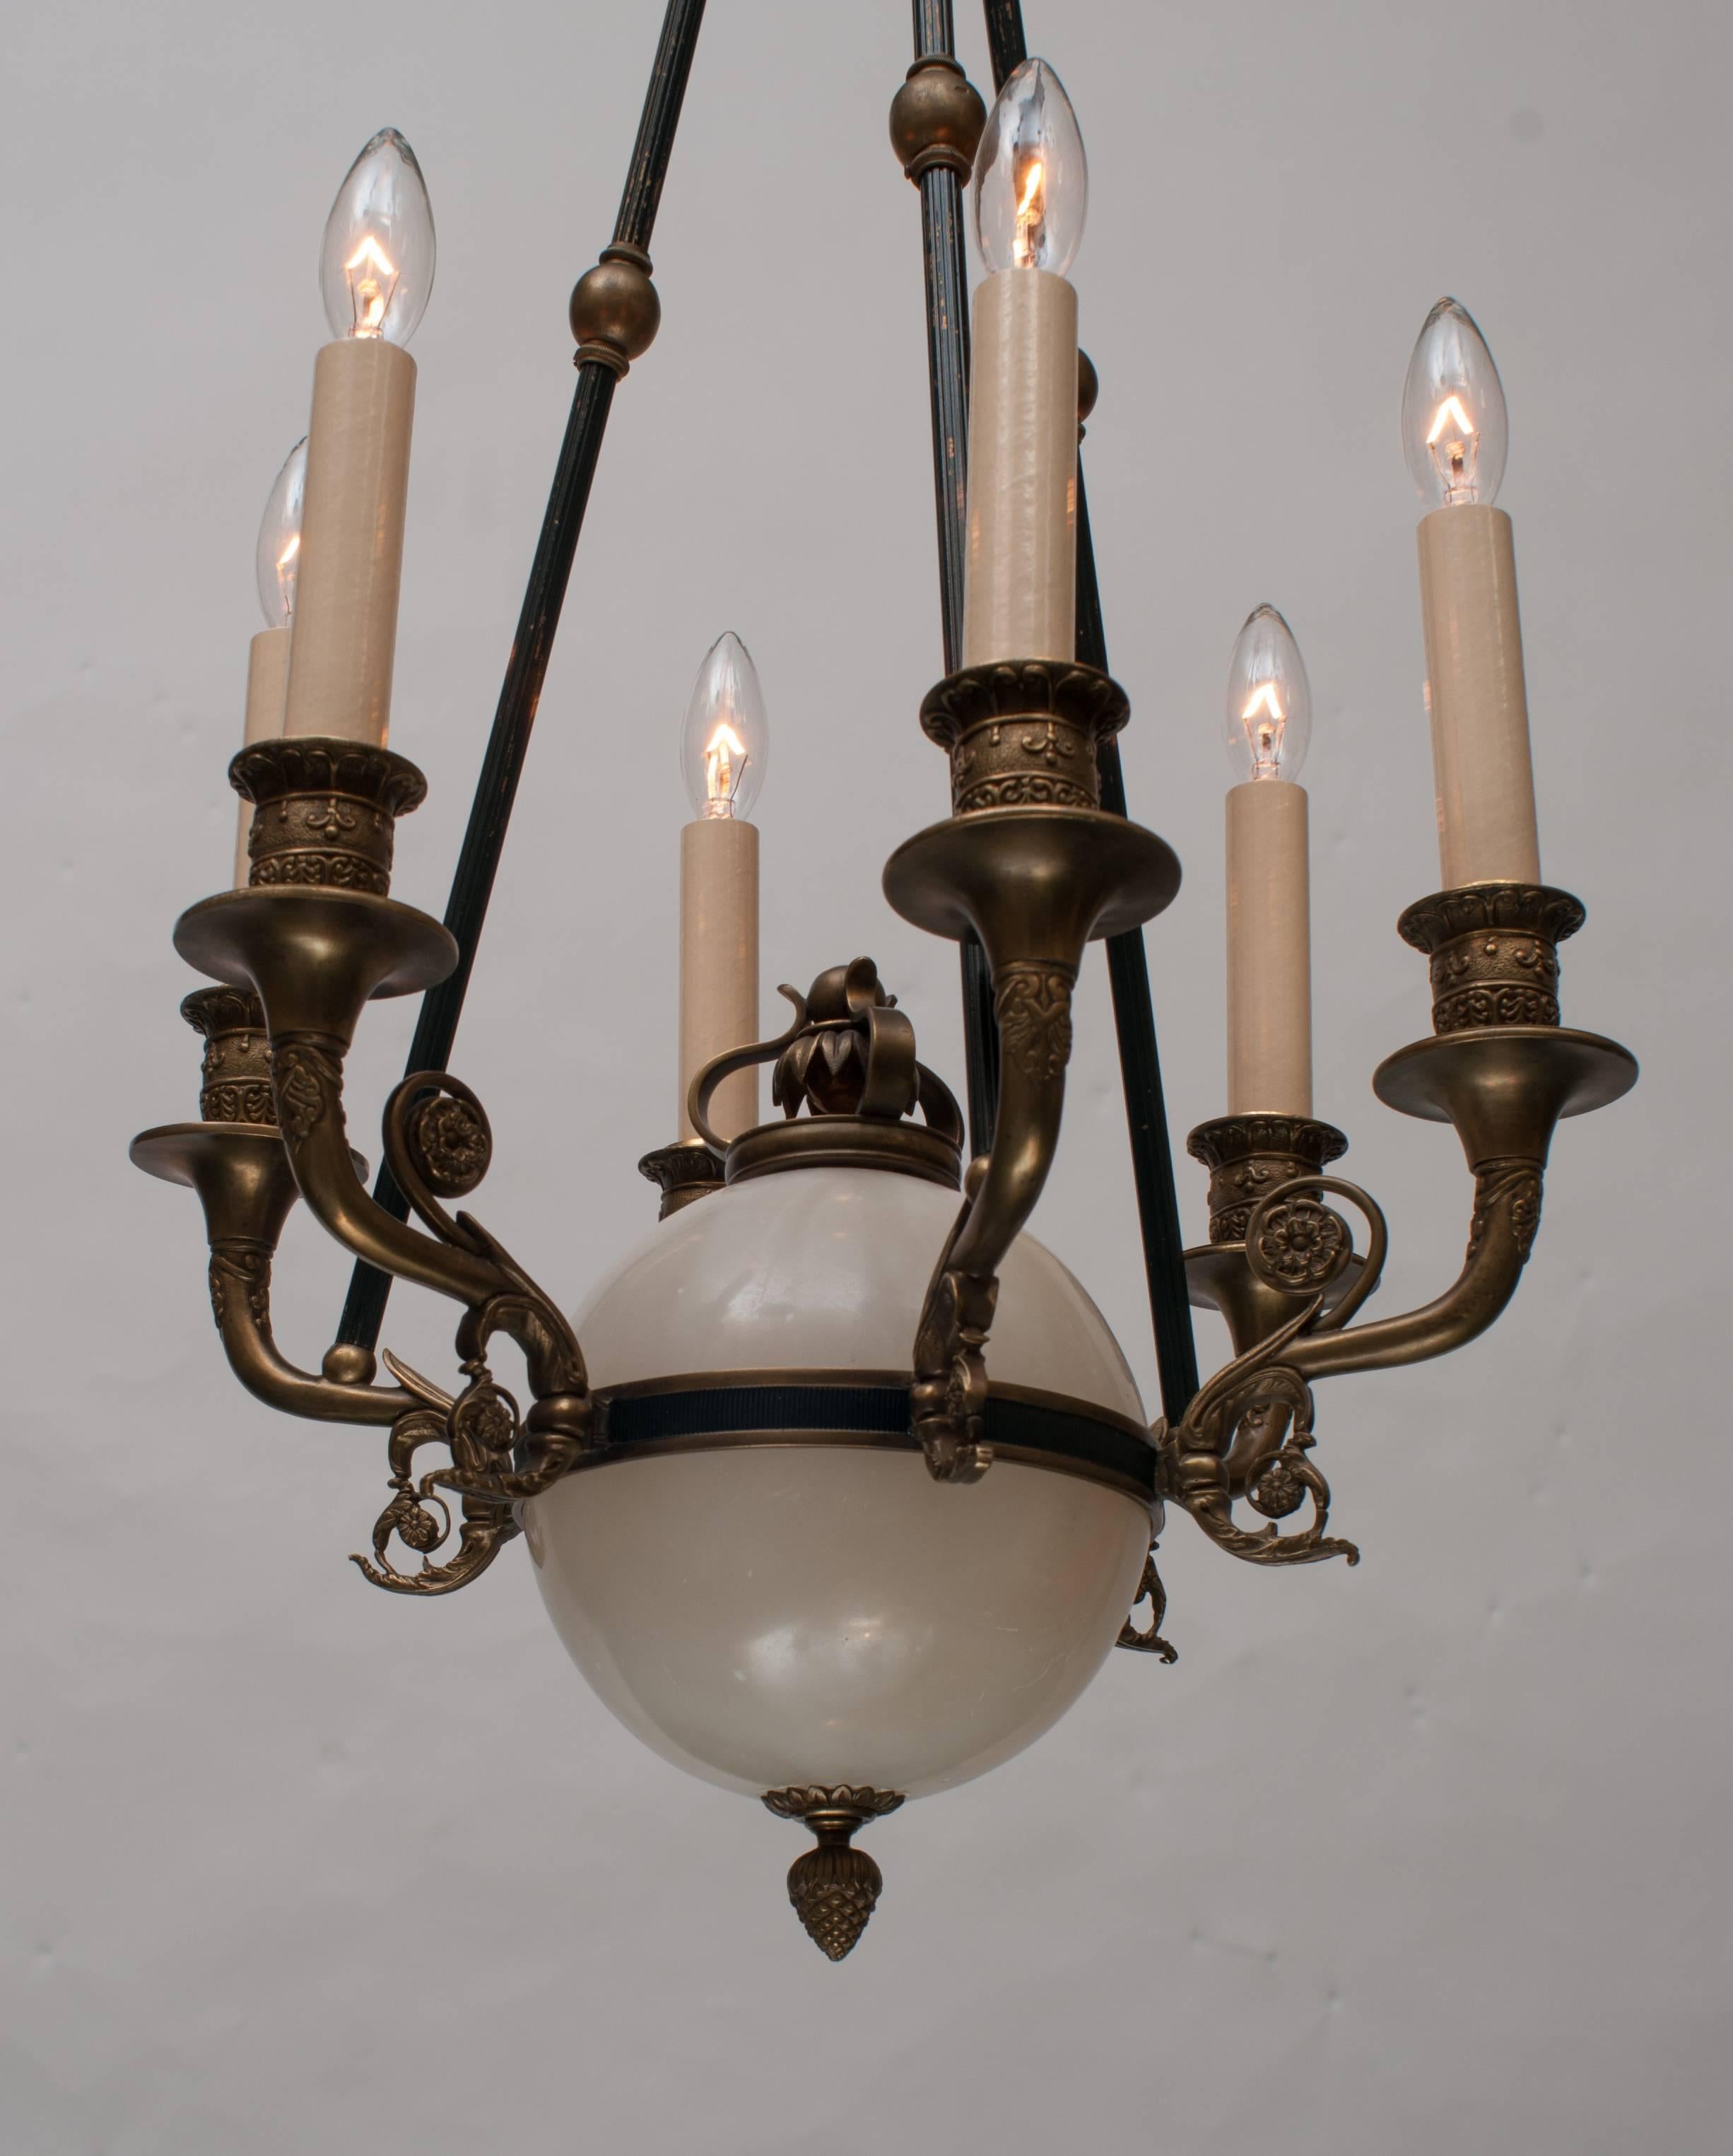 Unique alabaster orb, exceptionally fine hand-cast fittings and crown. Ceiling cap, chain, and hanging hardware included. Free installation within the Washington metro area, subject to some caveats.